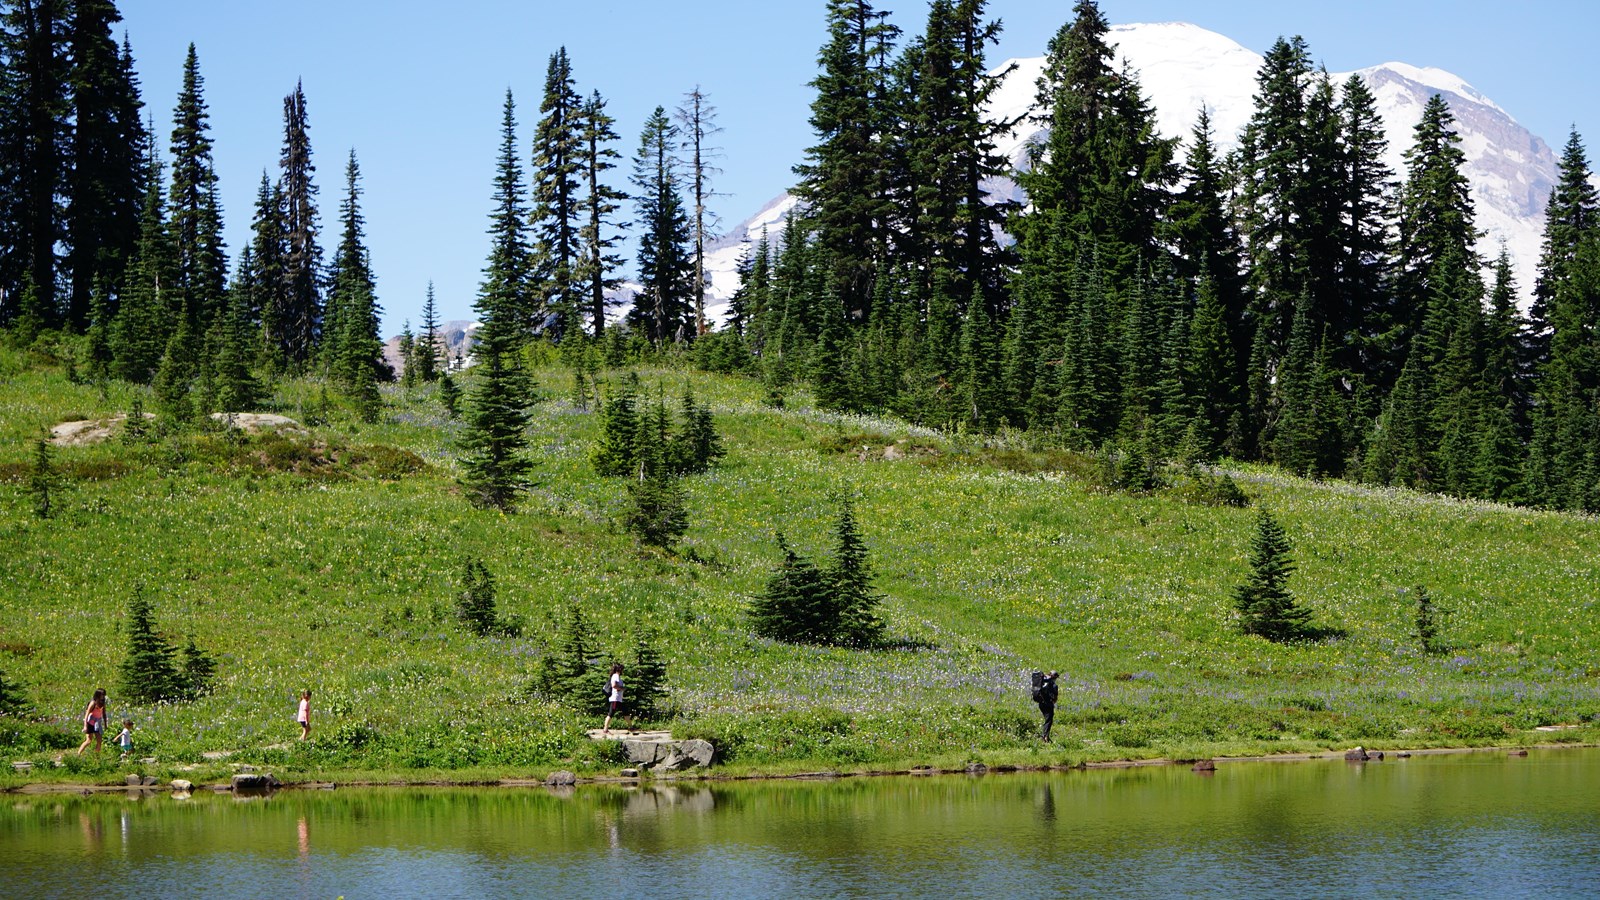 Several people walk along a trail next to a lake surrounded by wildflower meadows.